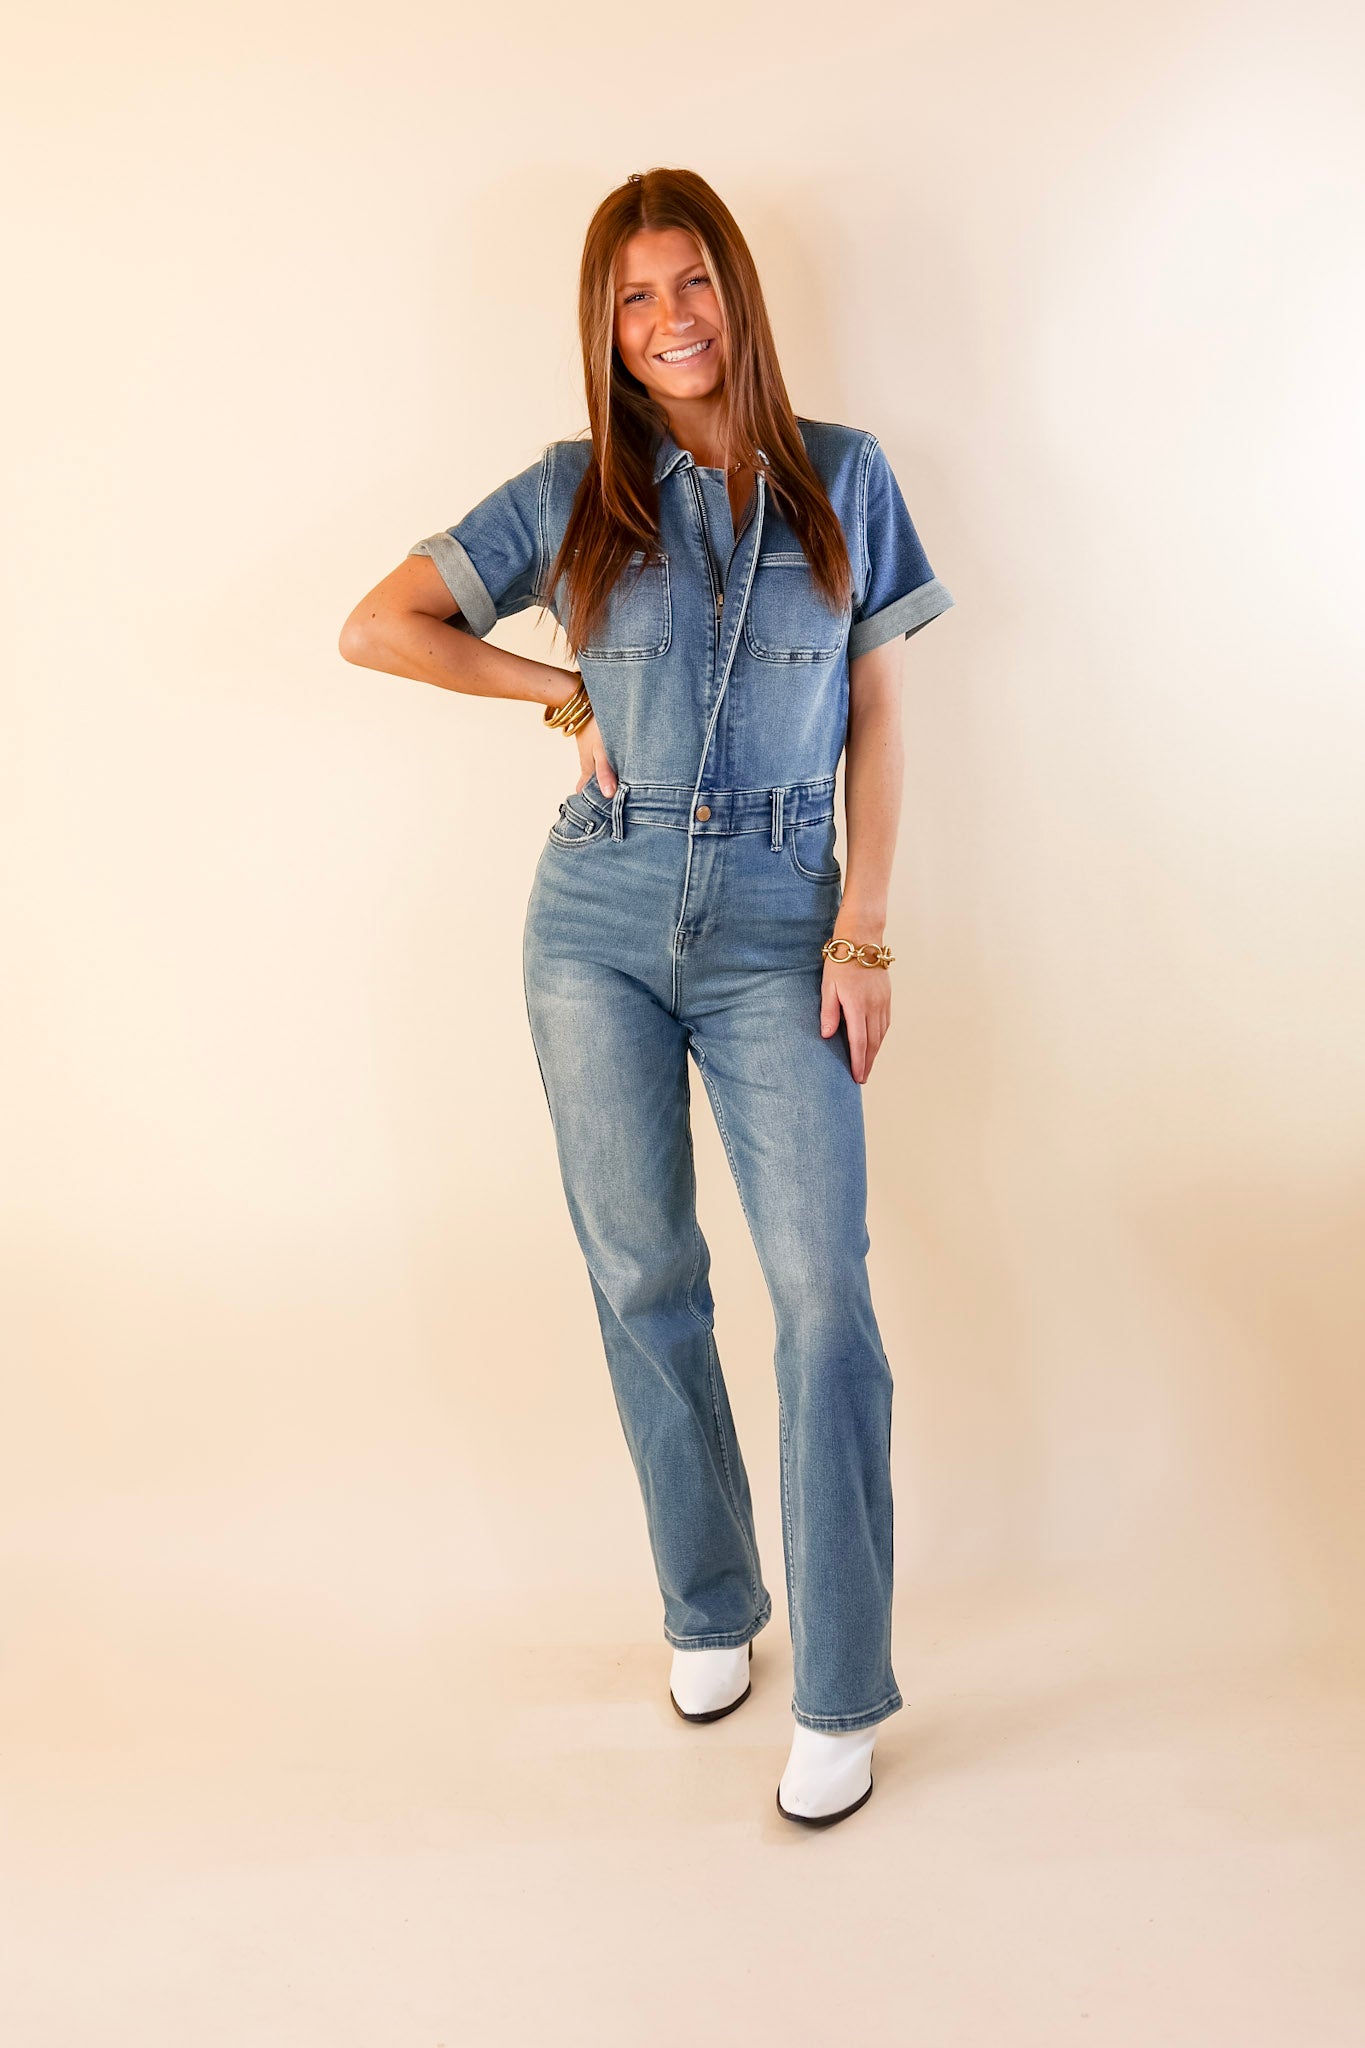 Judy Blue | New To The City Short Sleeve Denim Jumpsuit in Medium Wash